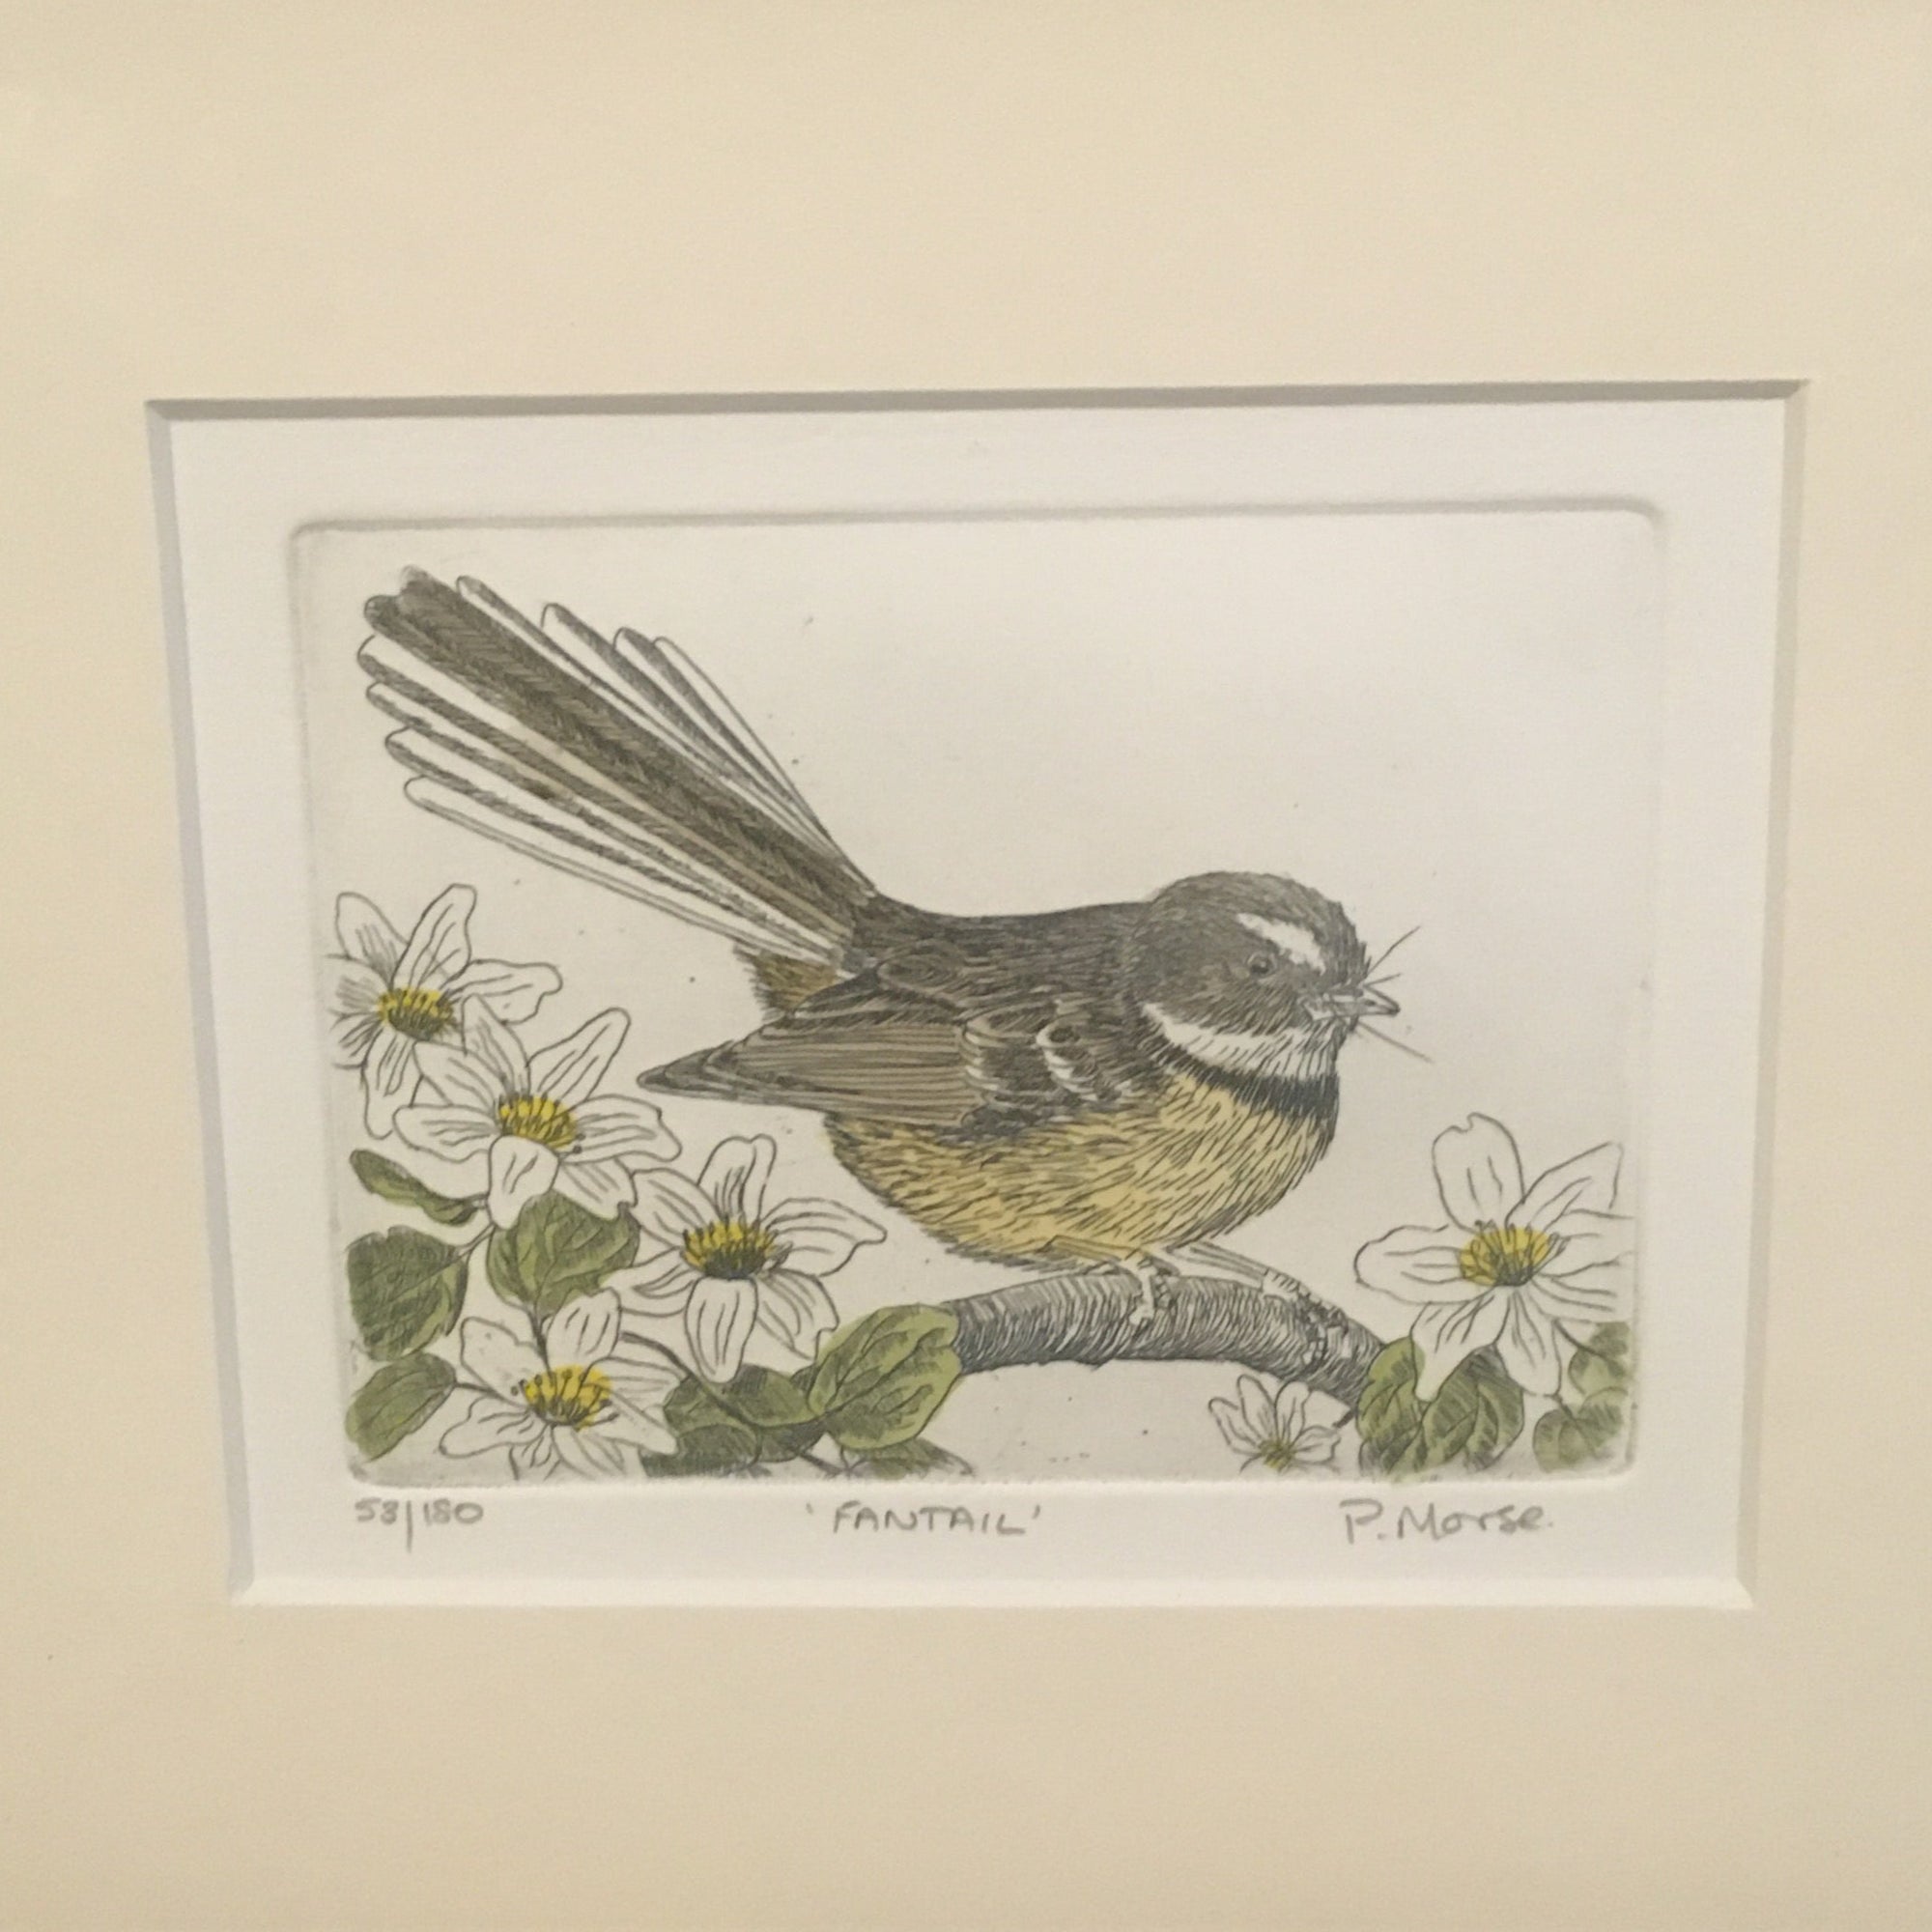 Fantail Limited Edition Etching